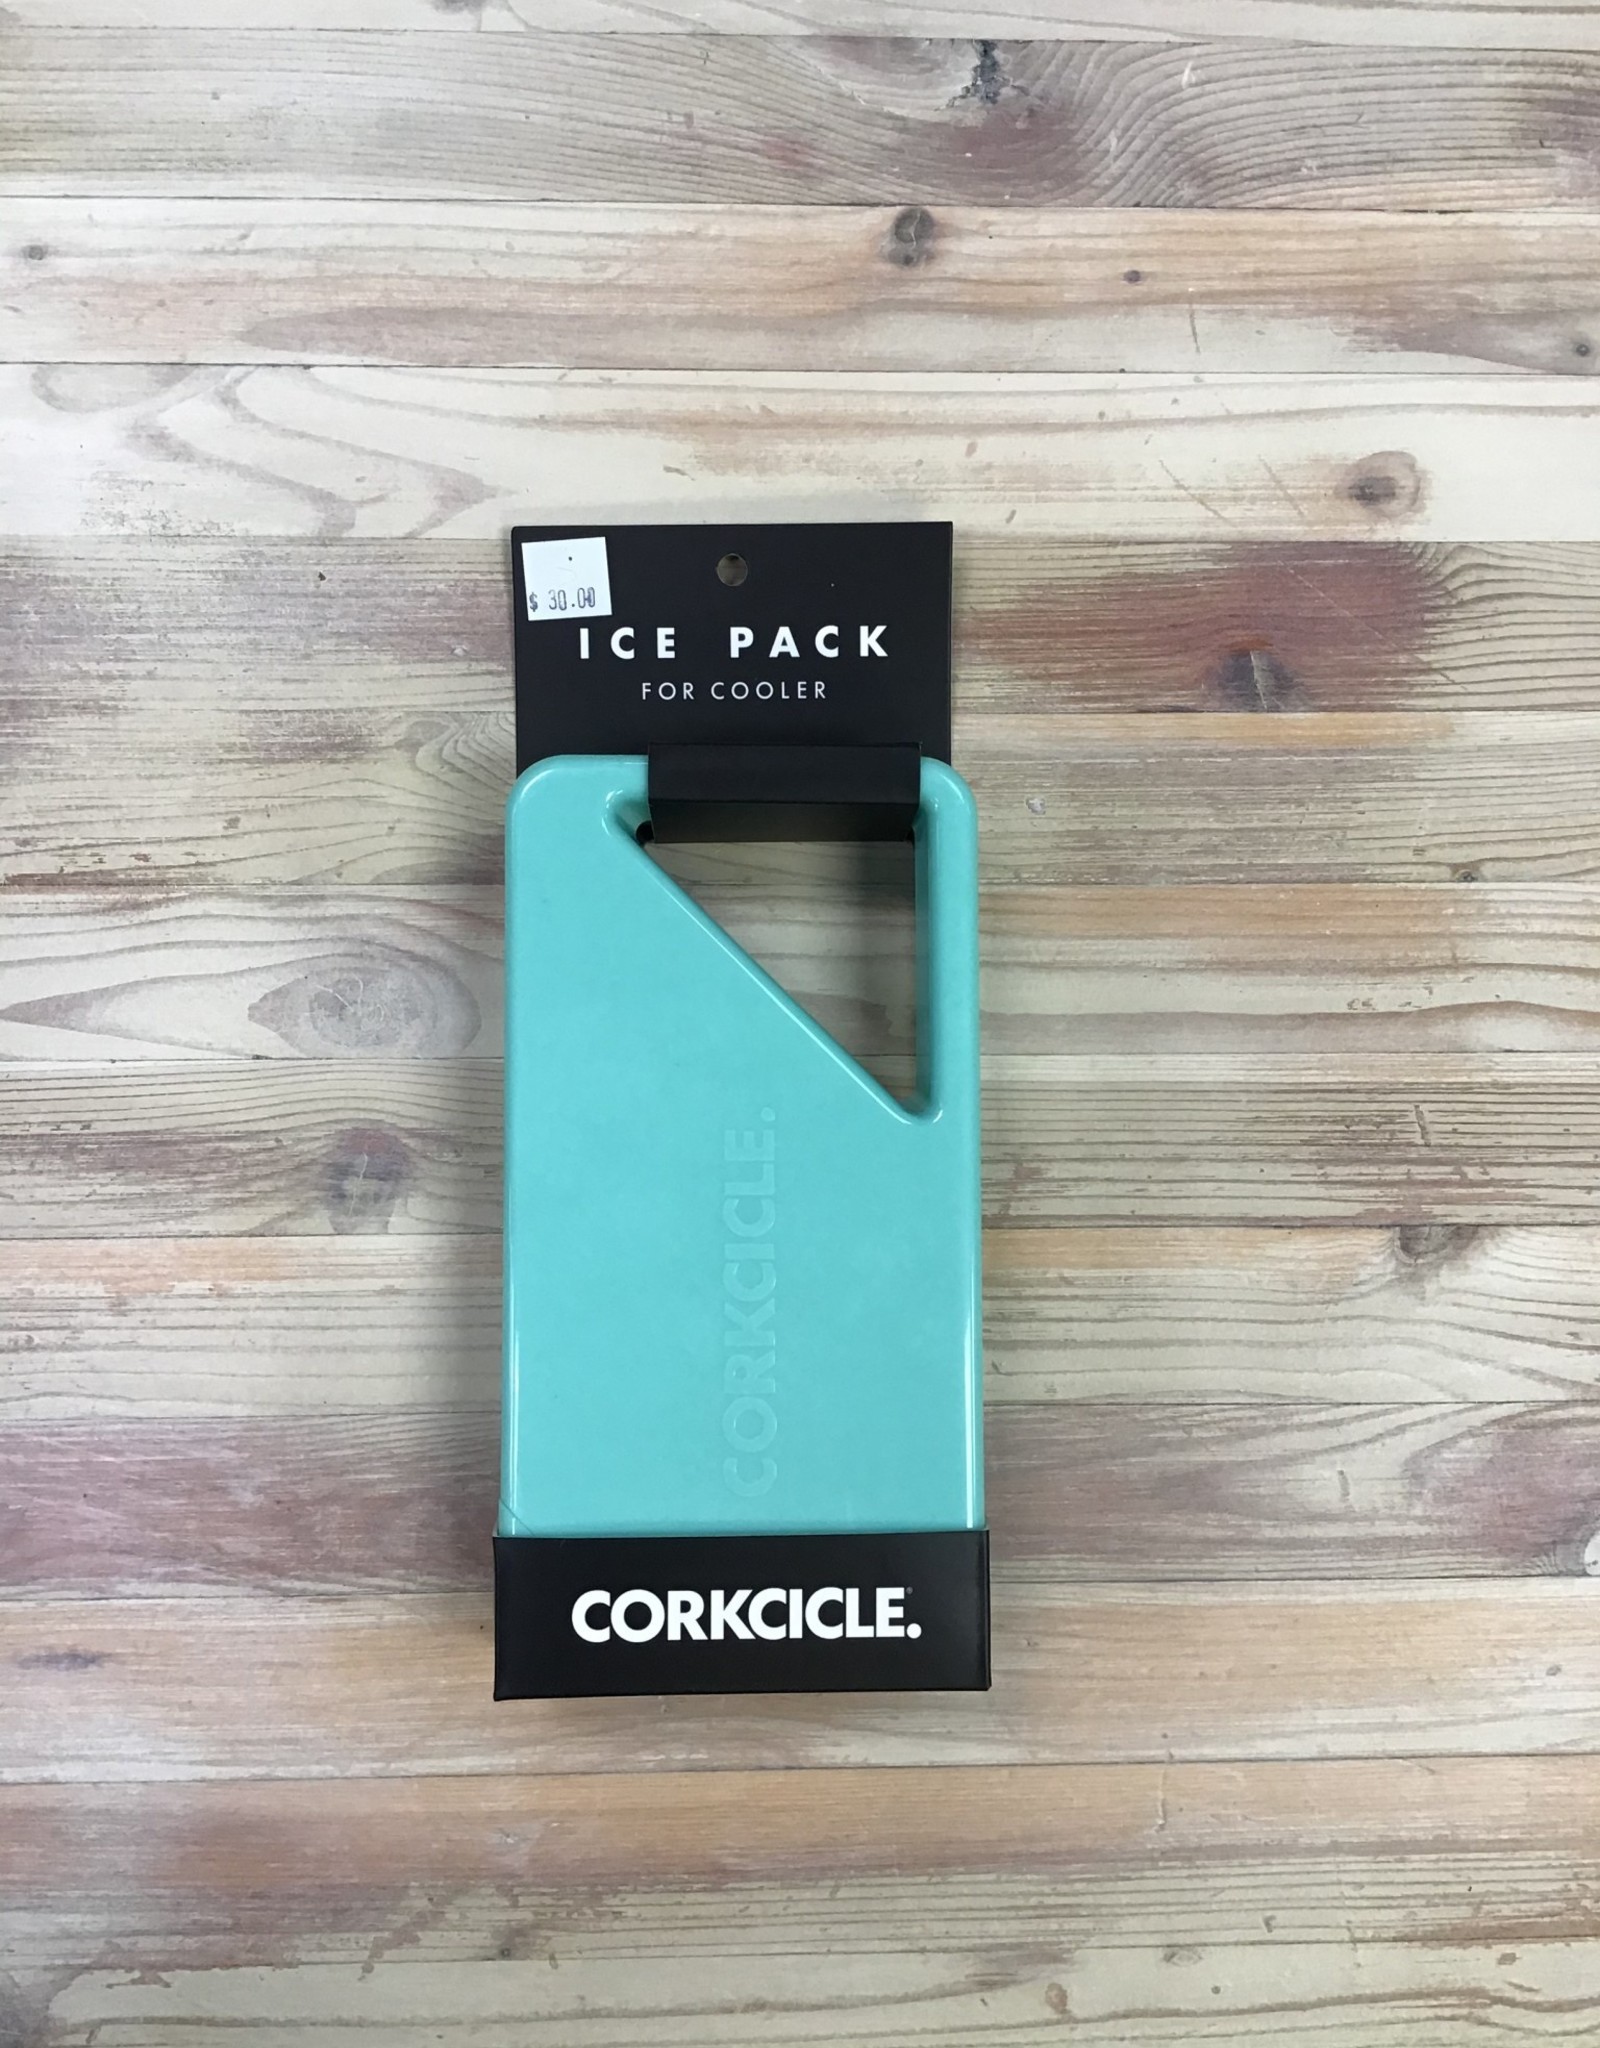 Corkcicle Corkcicle Ice Pack for Cooler